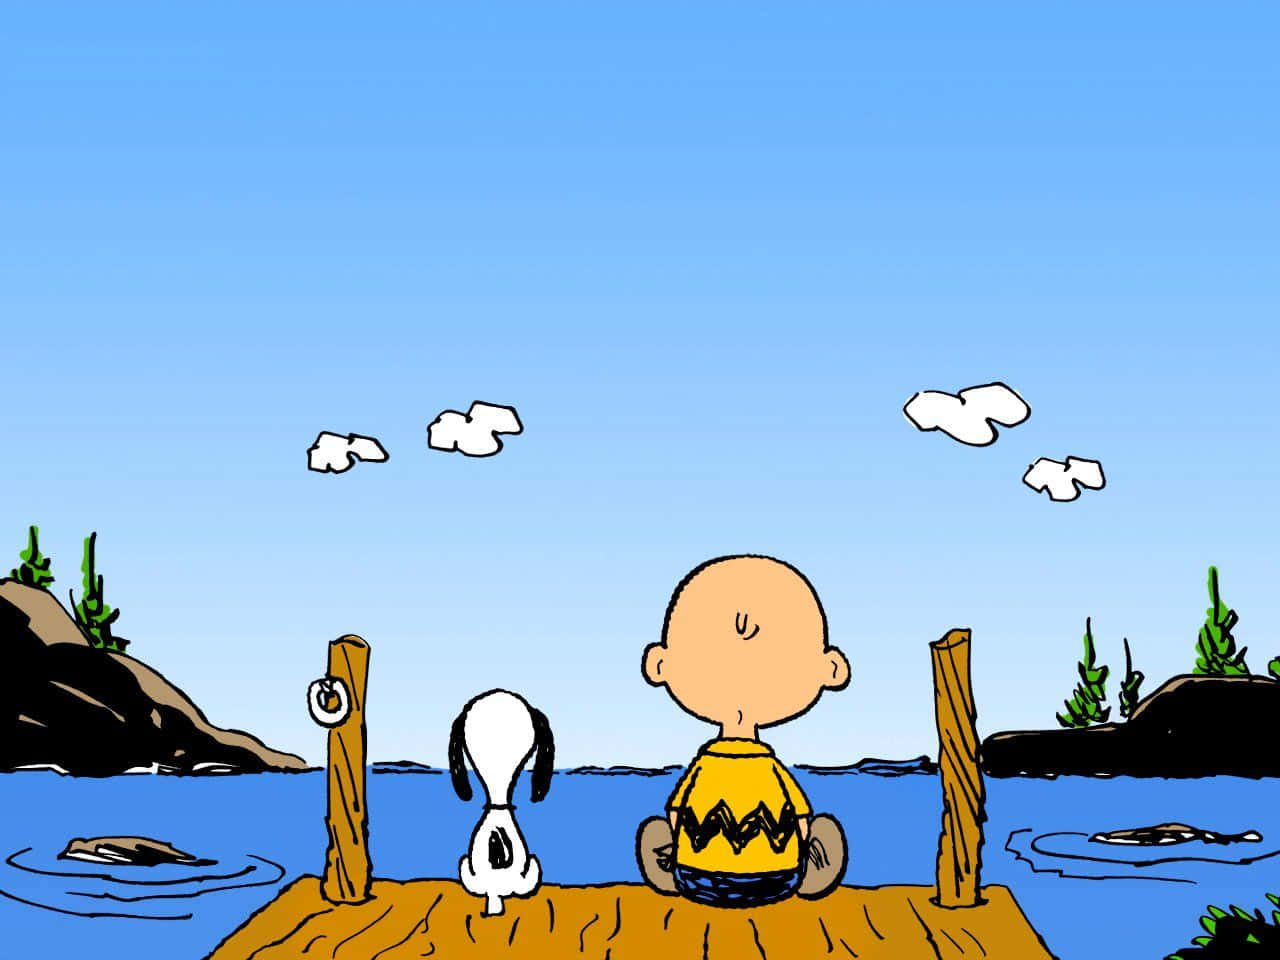 Snoopy, the World’s Most Famous Beagle